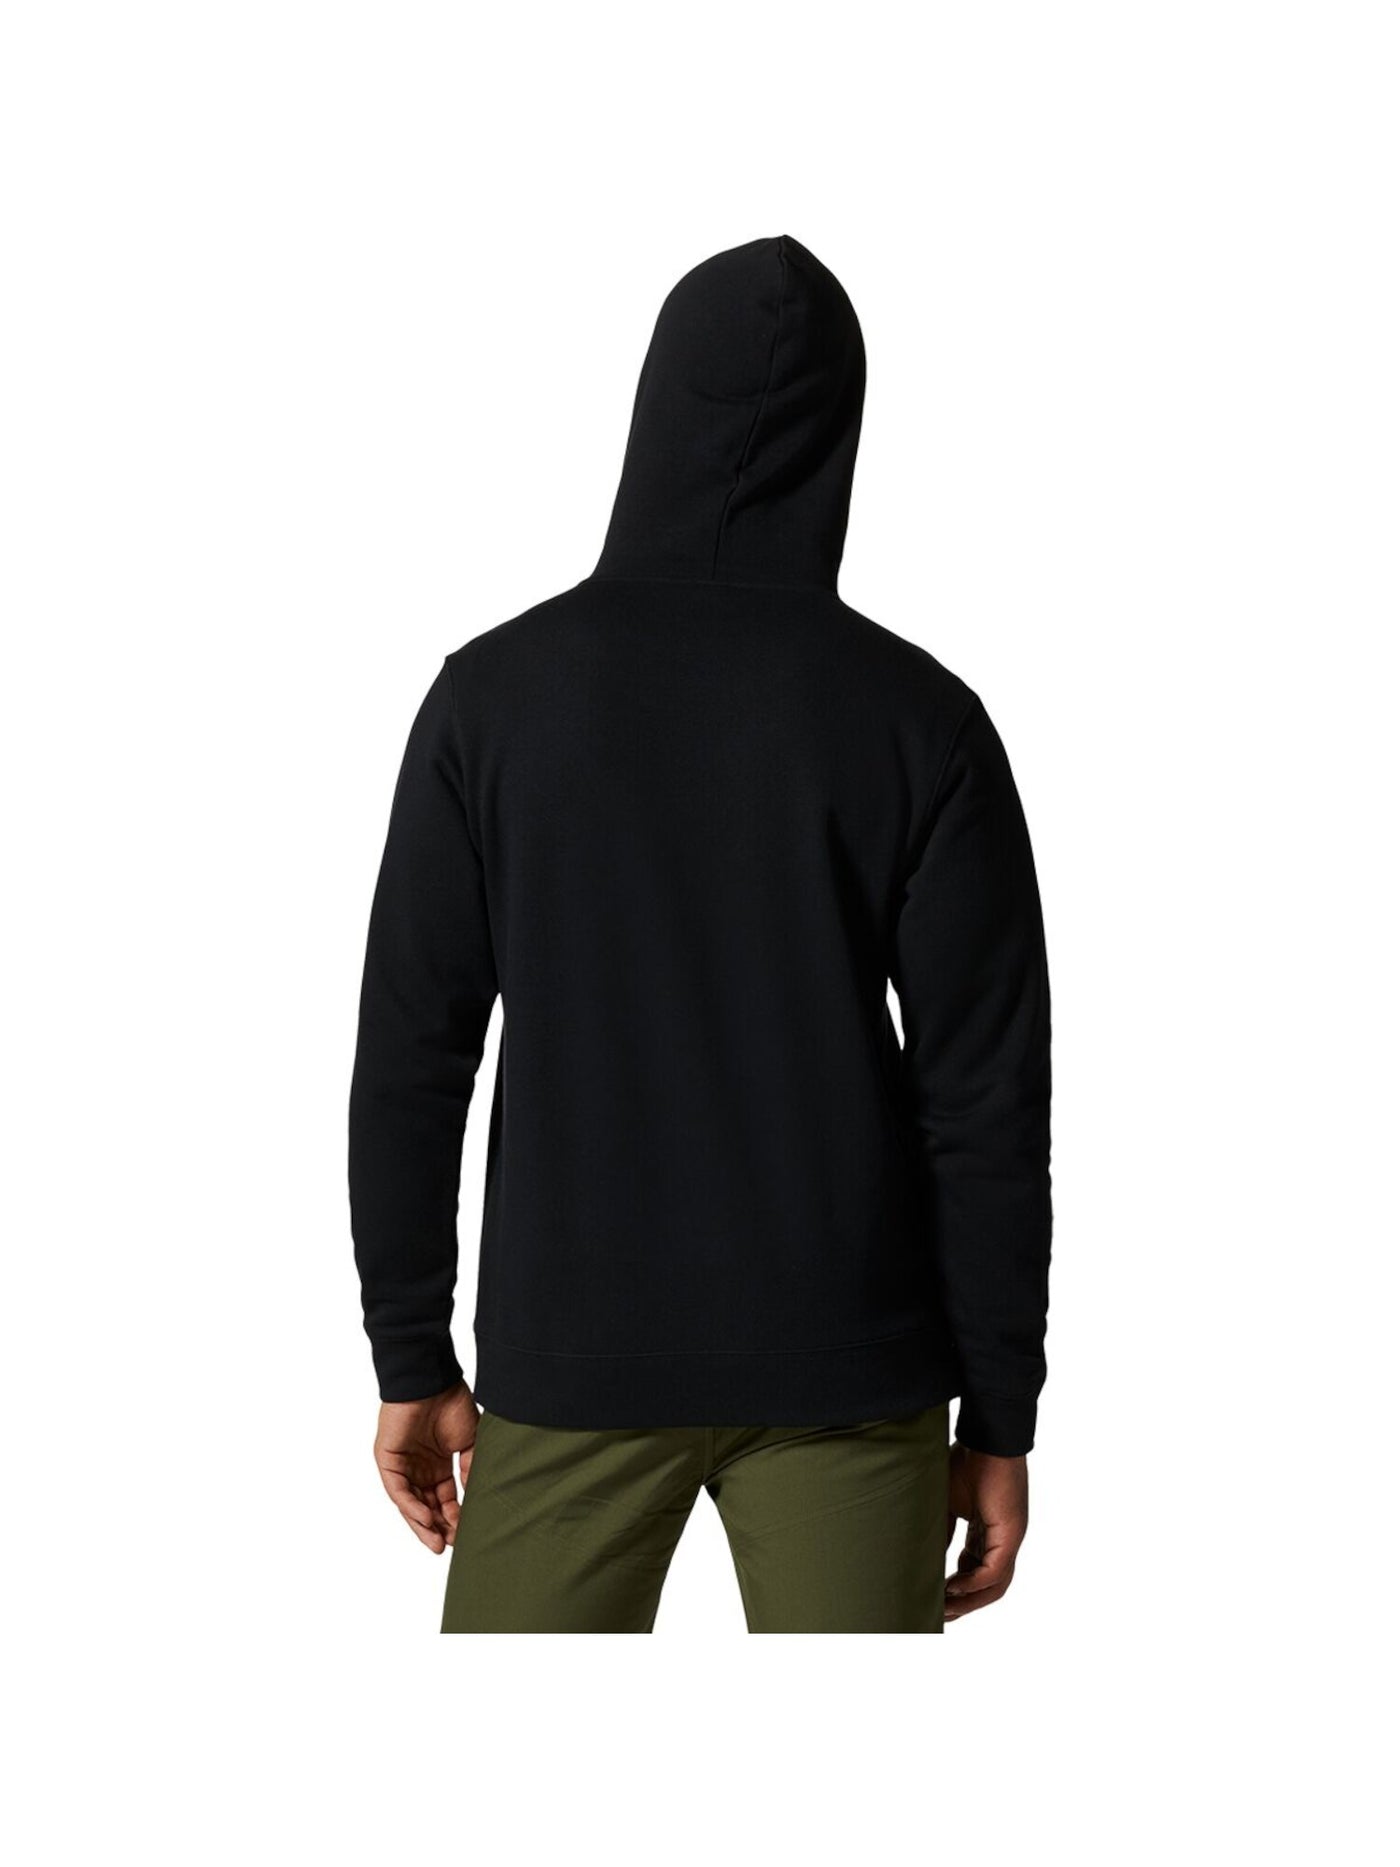 MOUNTAIN HARD WEAR Mens Black Logo Graphic Long Sleeve Classic Fit Draw String Hoodie M